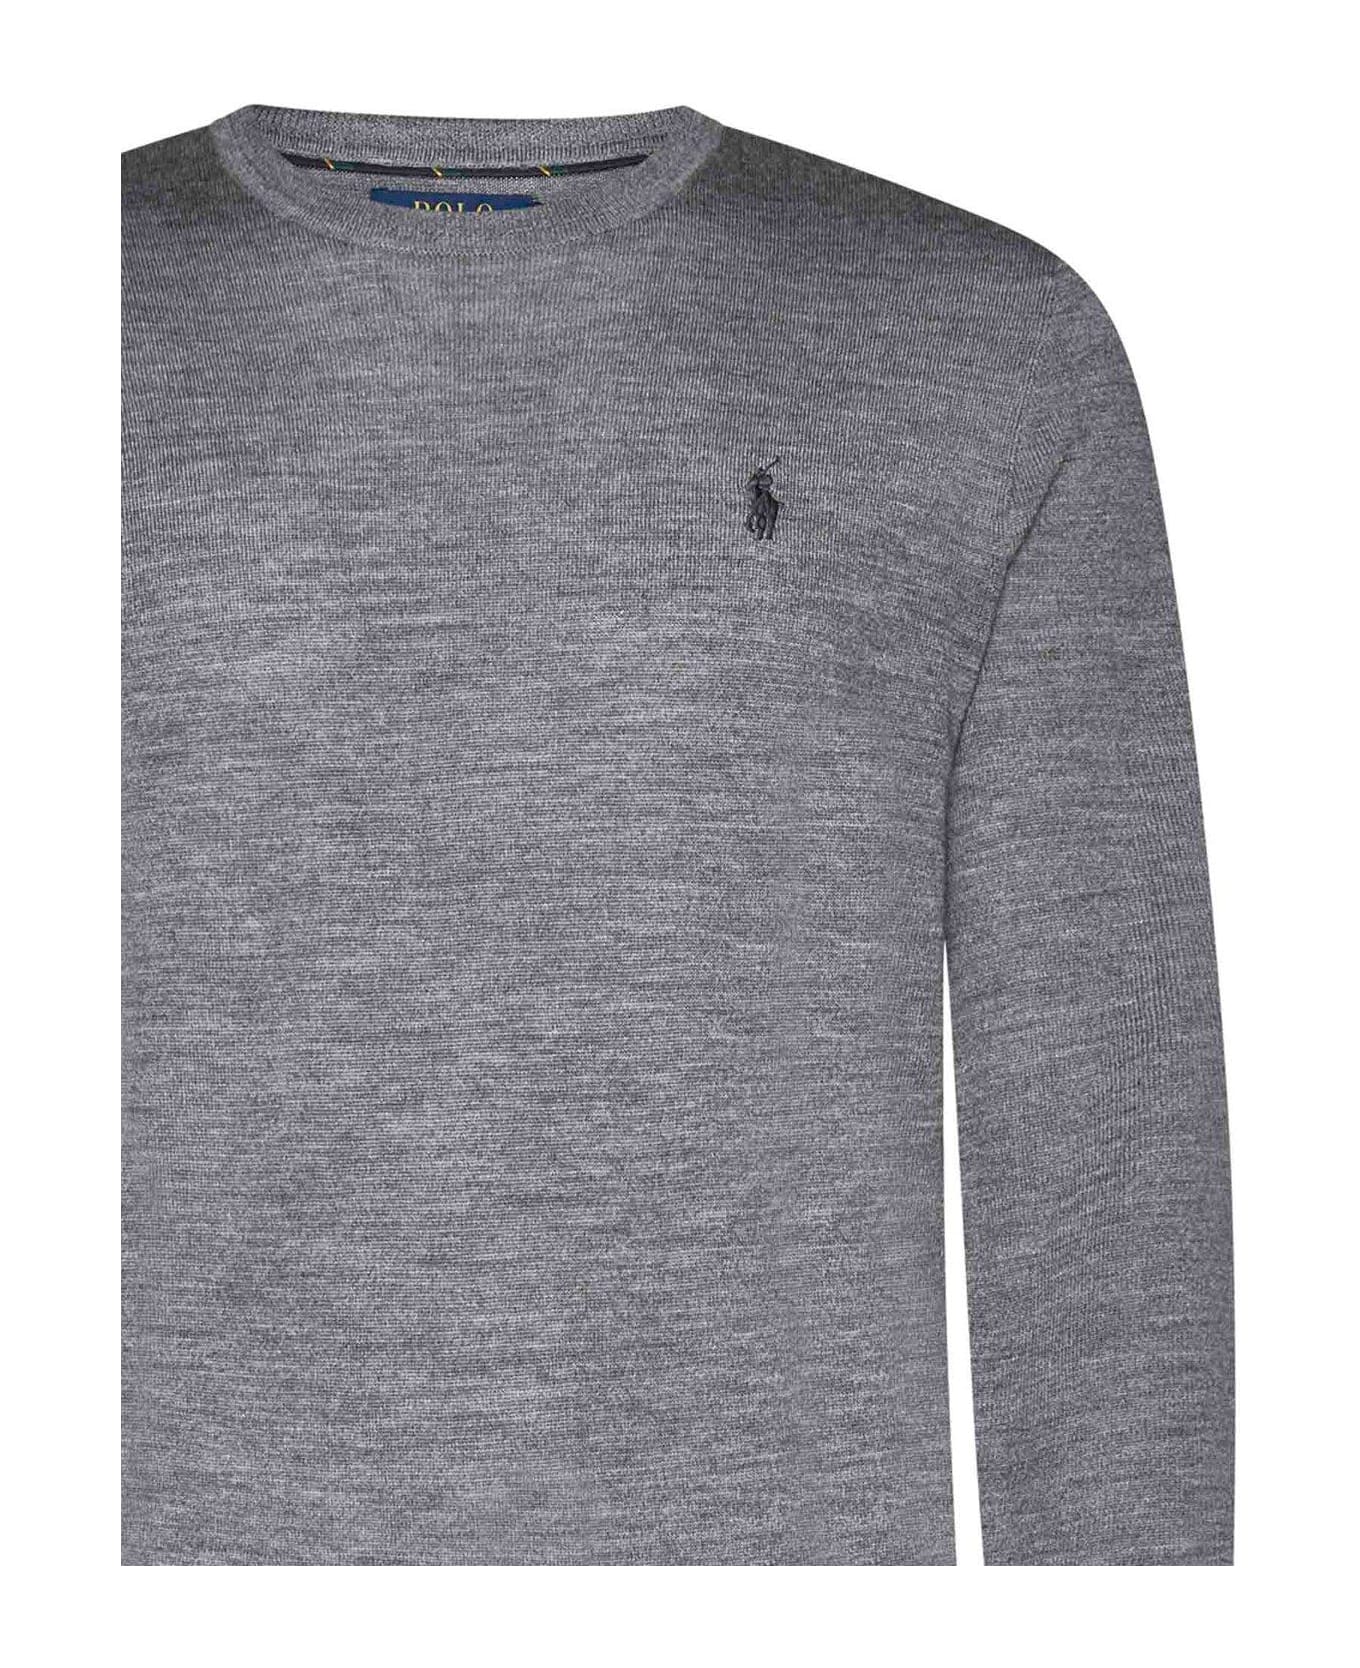 Ralph Lauren Pony Embroidered Knit Jumper - Fawn Grey Heather